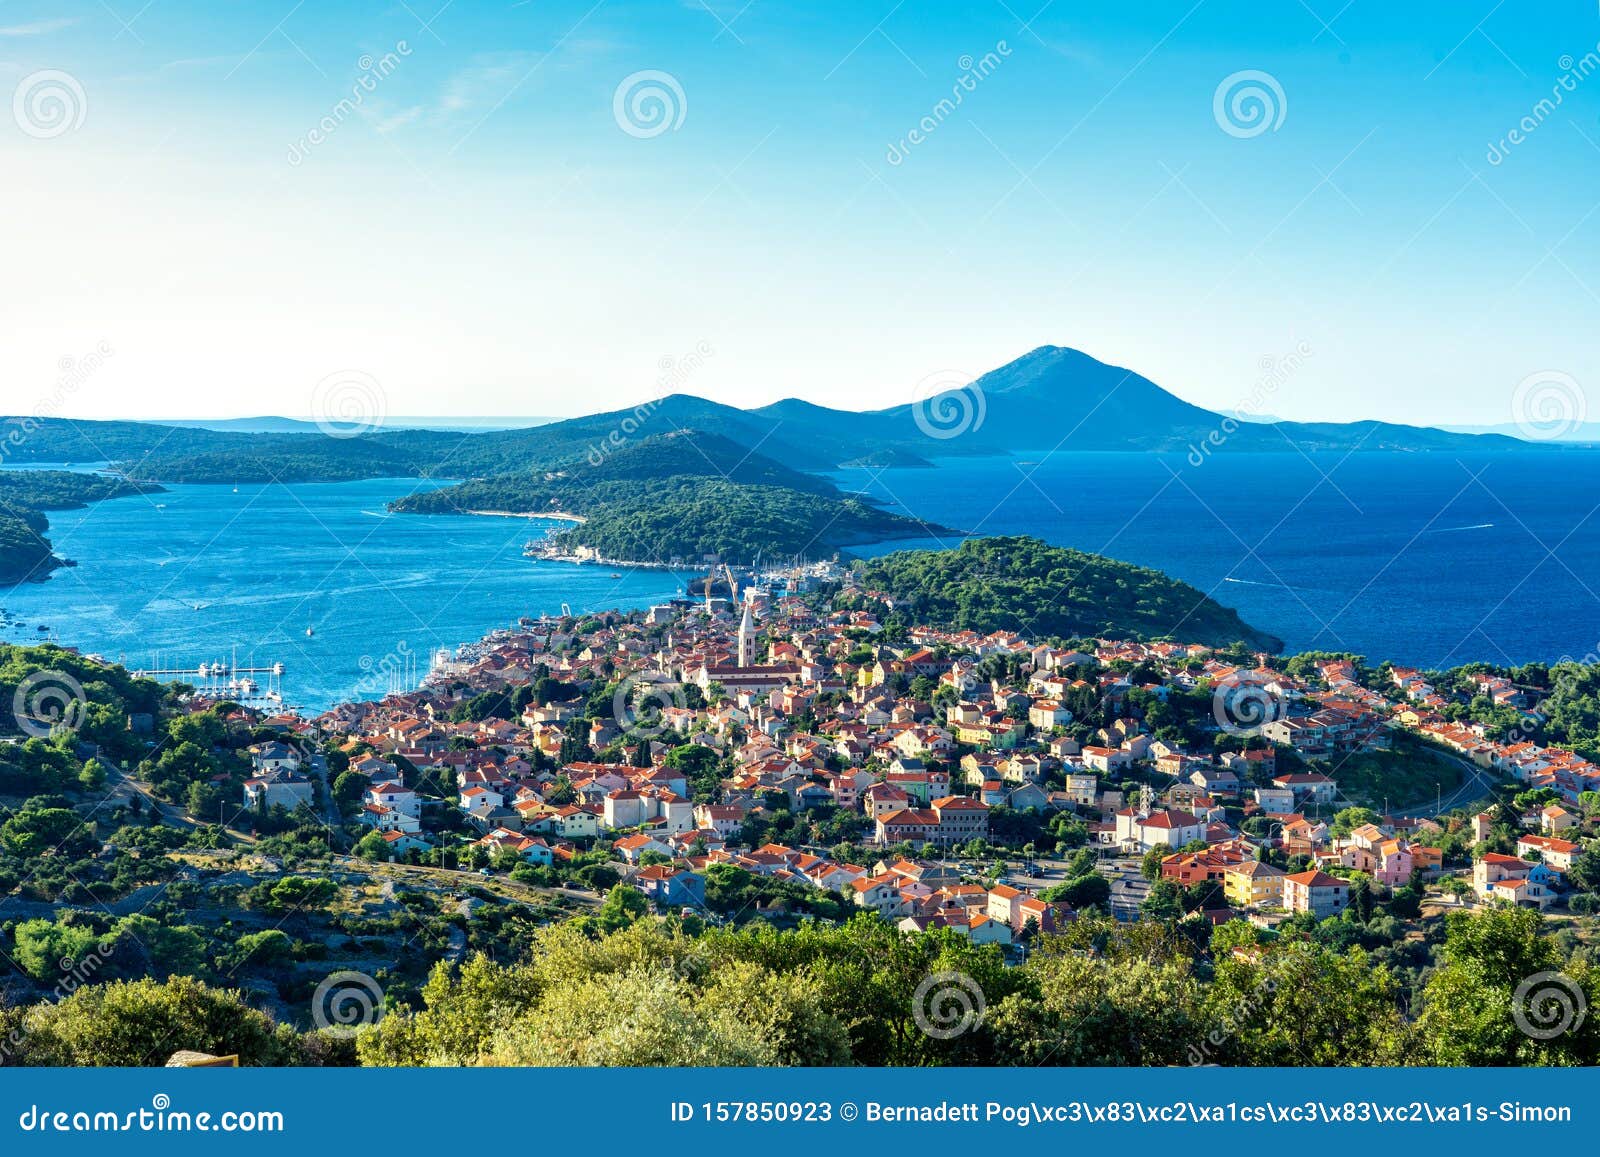 scenic view of the croatian losinj islands in the kvarner gulf daytime